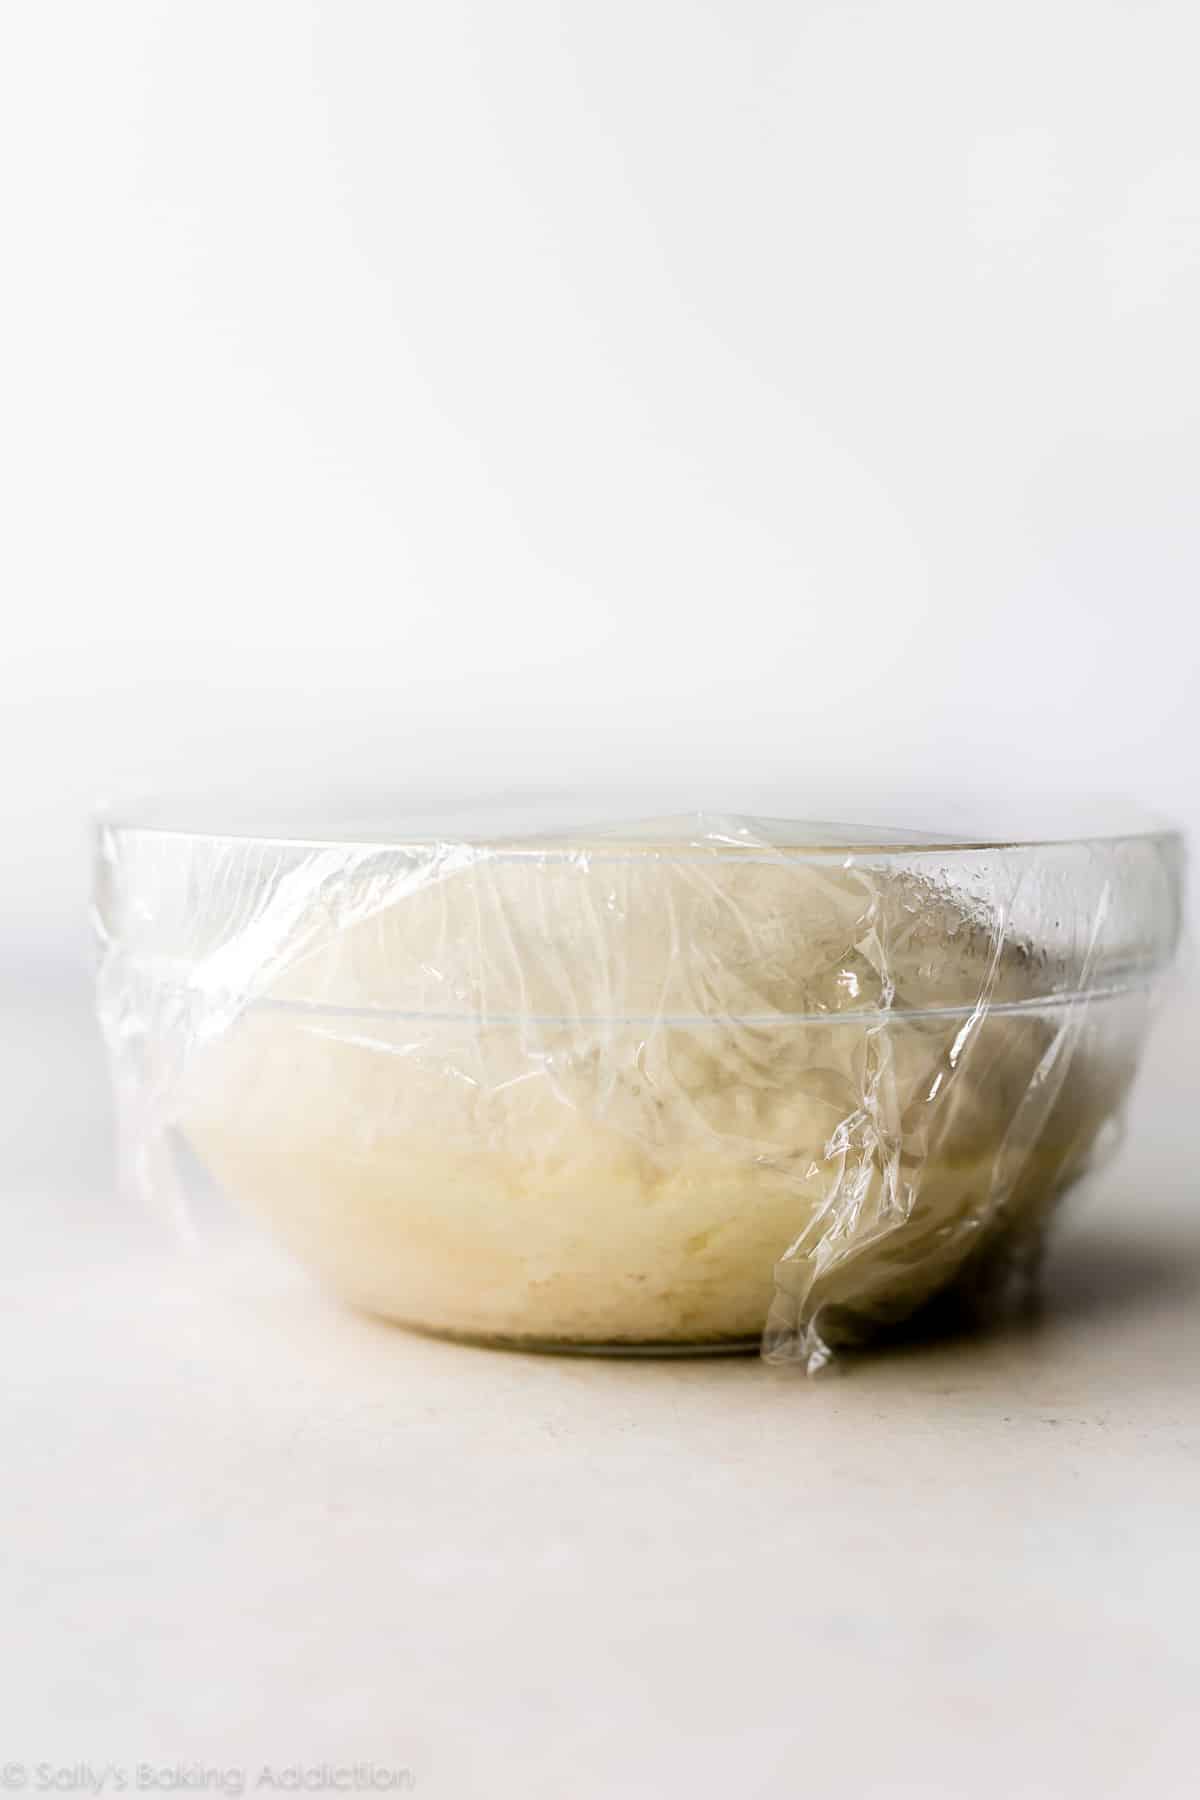 Dough doubled in size in glass bowl